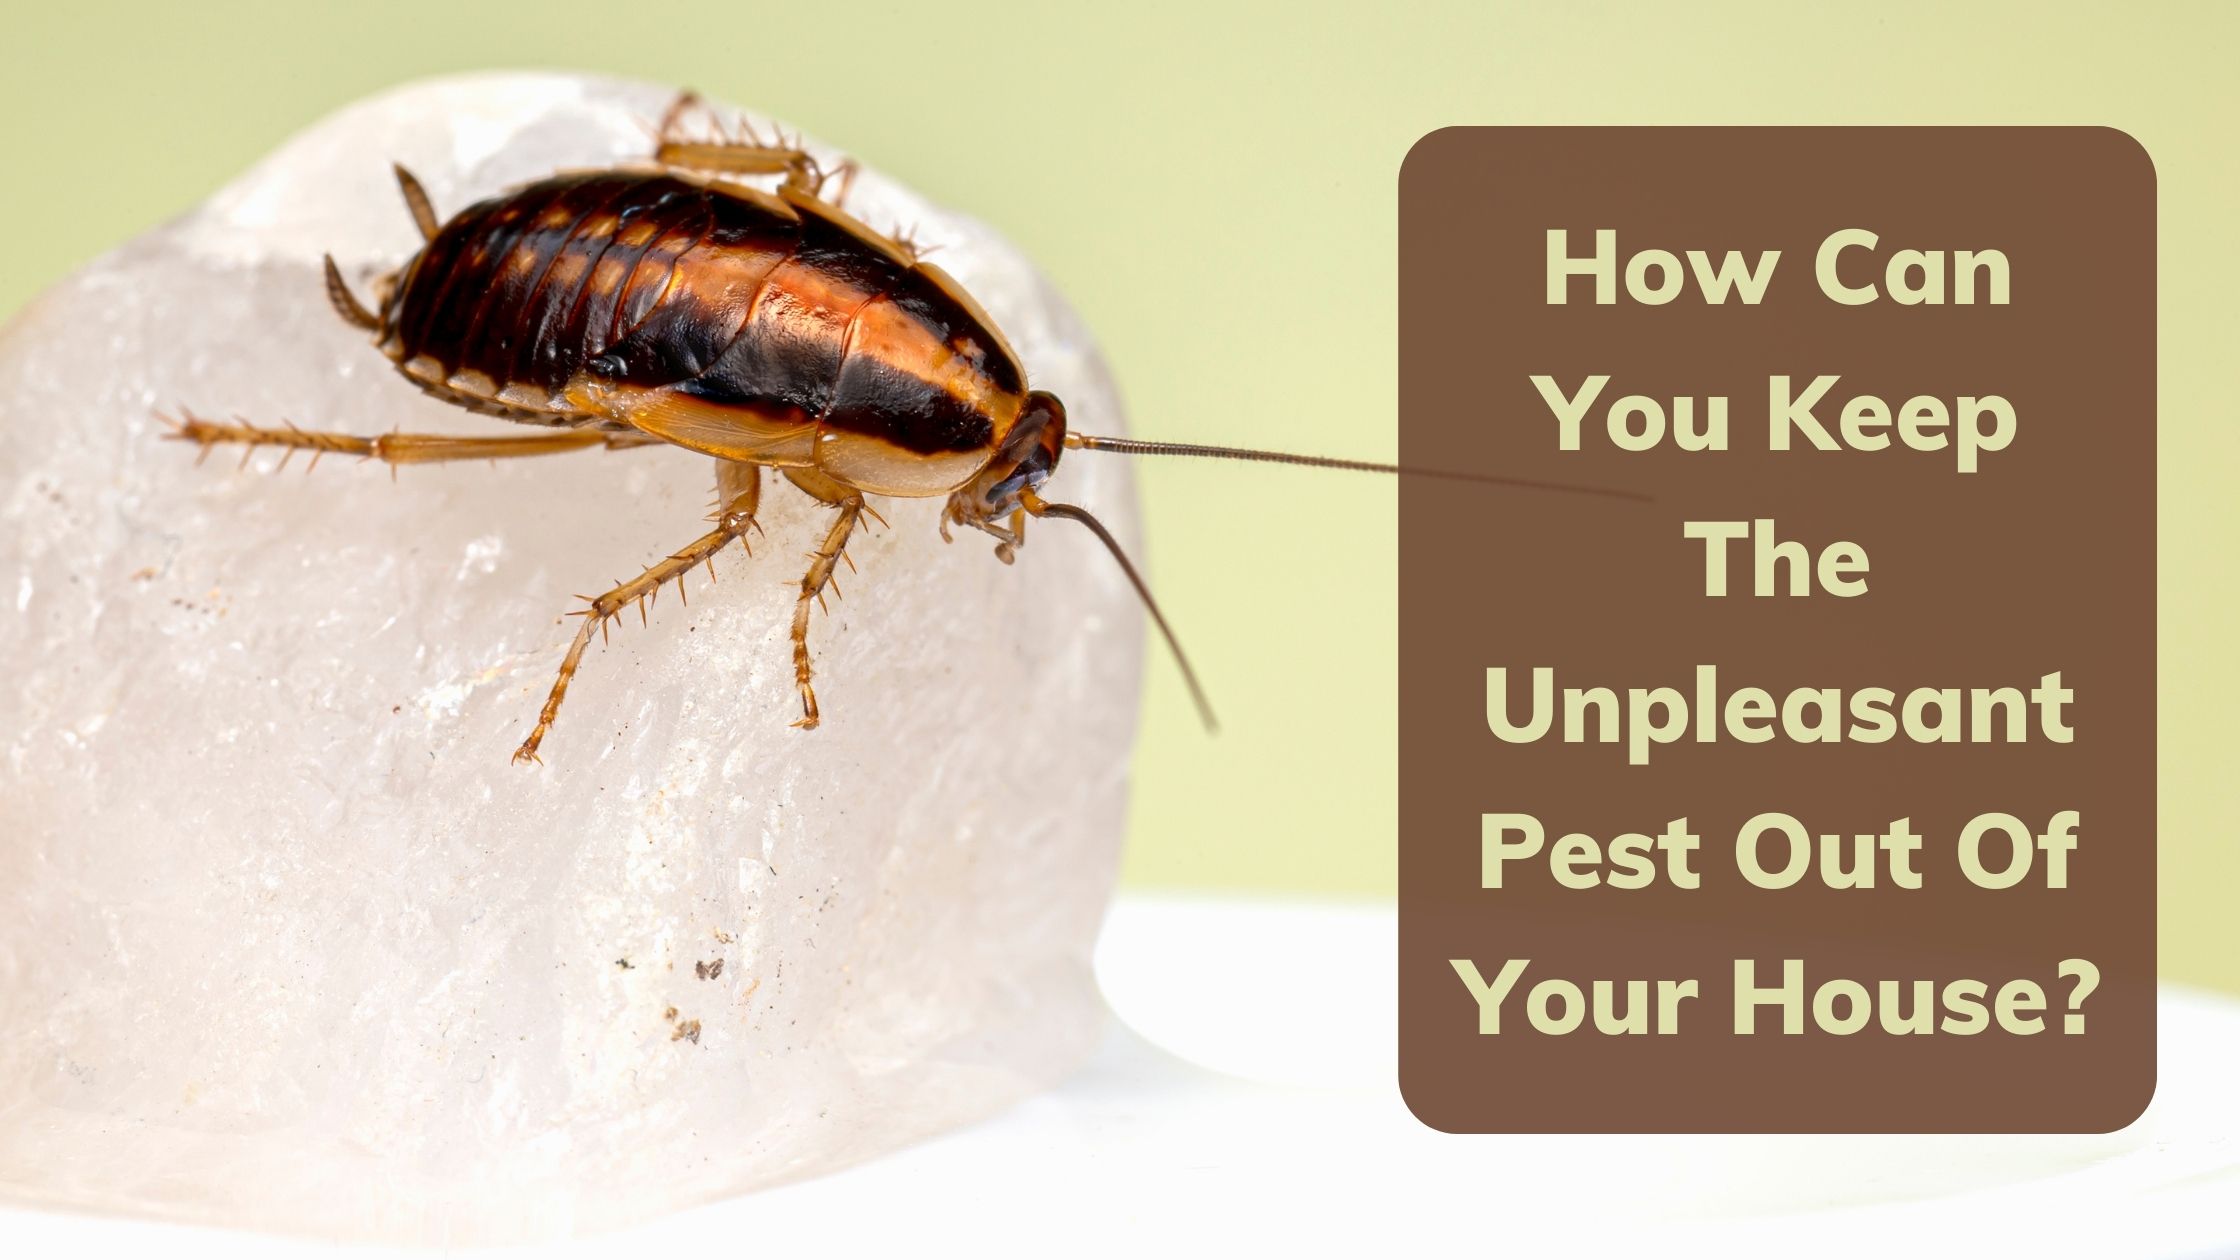 How Can You Keep The Unpleasant Pest Out Of Your House?